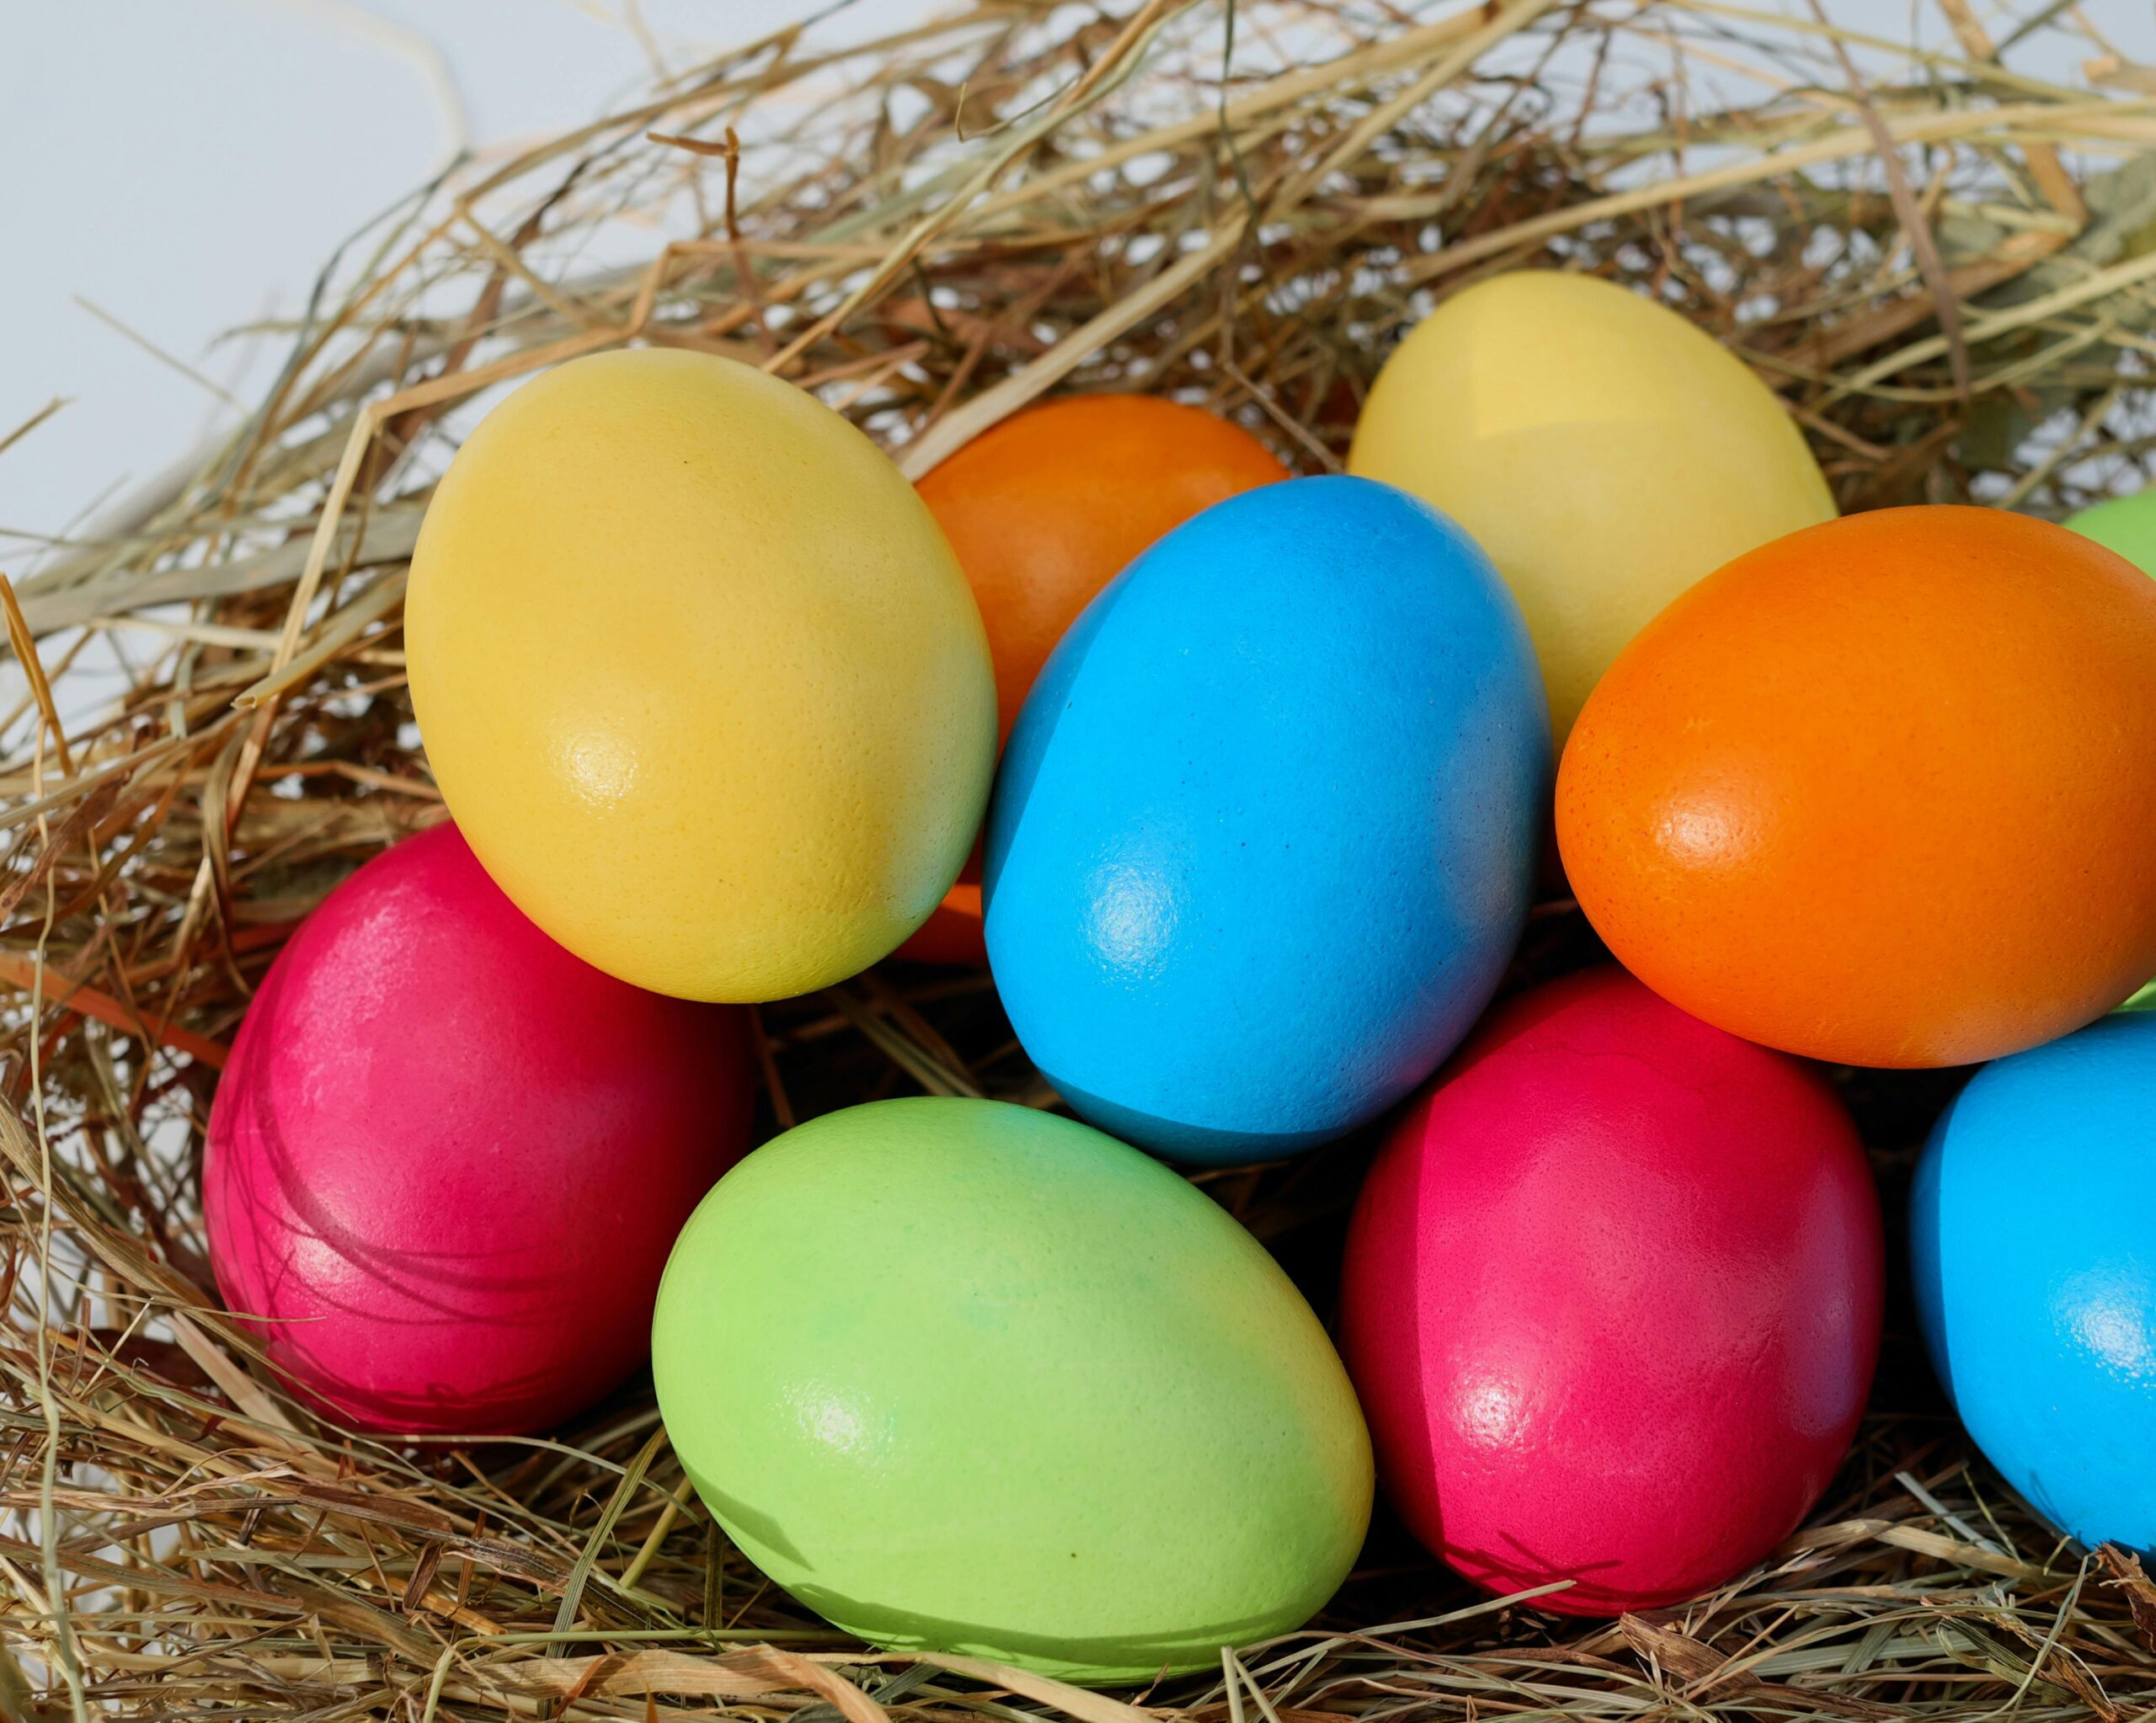 Egg-citing Ideas: The Magic of Colored Easter Eggs